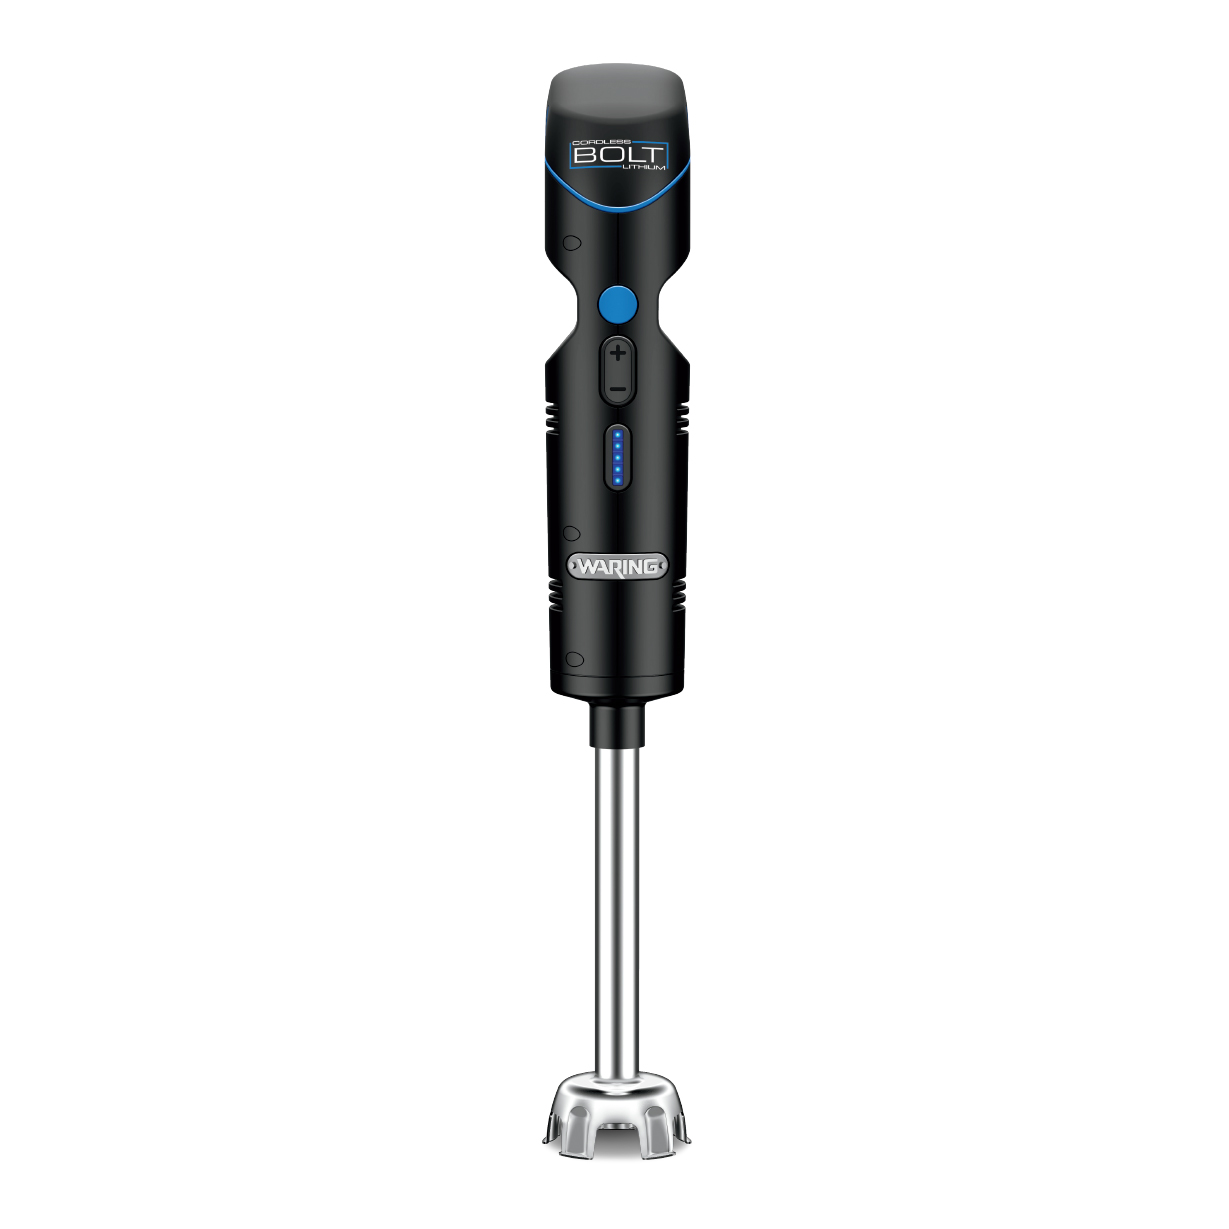 Bolt Immersion Blender,
medium duty,
cordless/rechargeable, 7&quot;
stainless steel removable
shaft, stainless steel blade,
variable speed, brushless DC
motor, 10.8 volt Lithium Ion
battery pack, includes:
charging station &amp;
storage/transport case,
cETLus, ETL-Sanitation, 1/21

For Customer Care &amp; Product 
Service, please contact:
(800) 269-6640
waring_service@conair.com